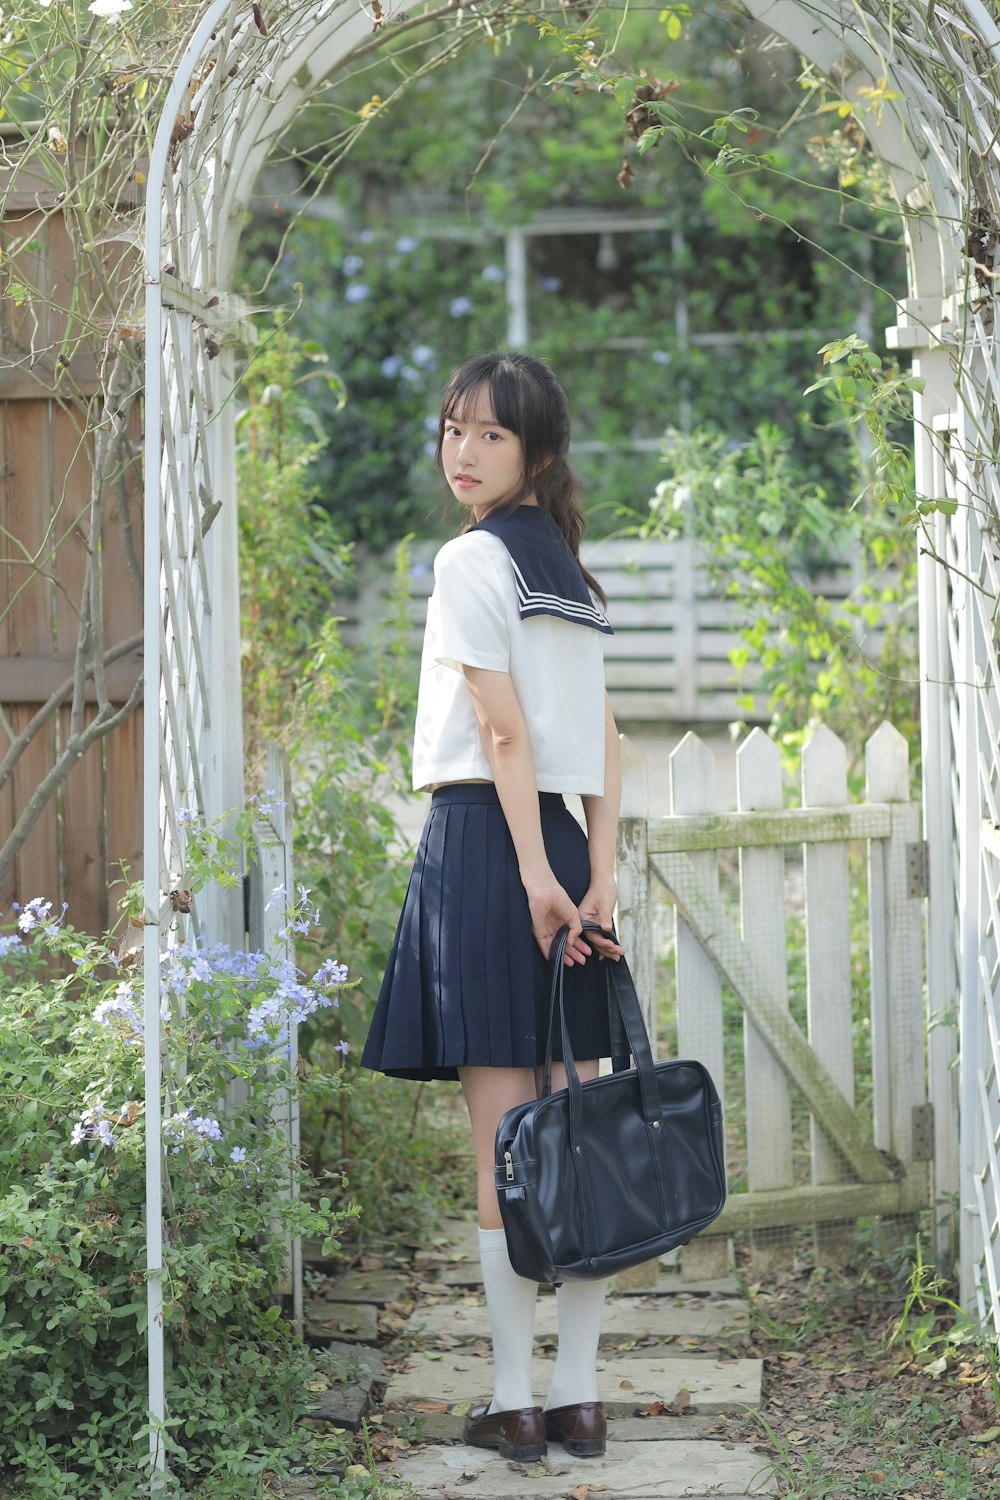 a woman in a white shirt and black skirt carrying a black bag